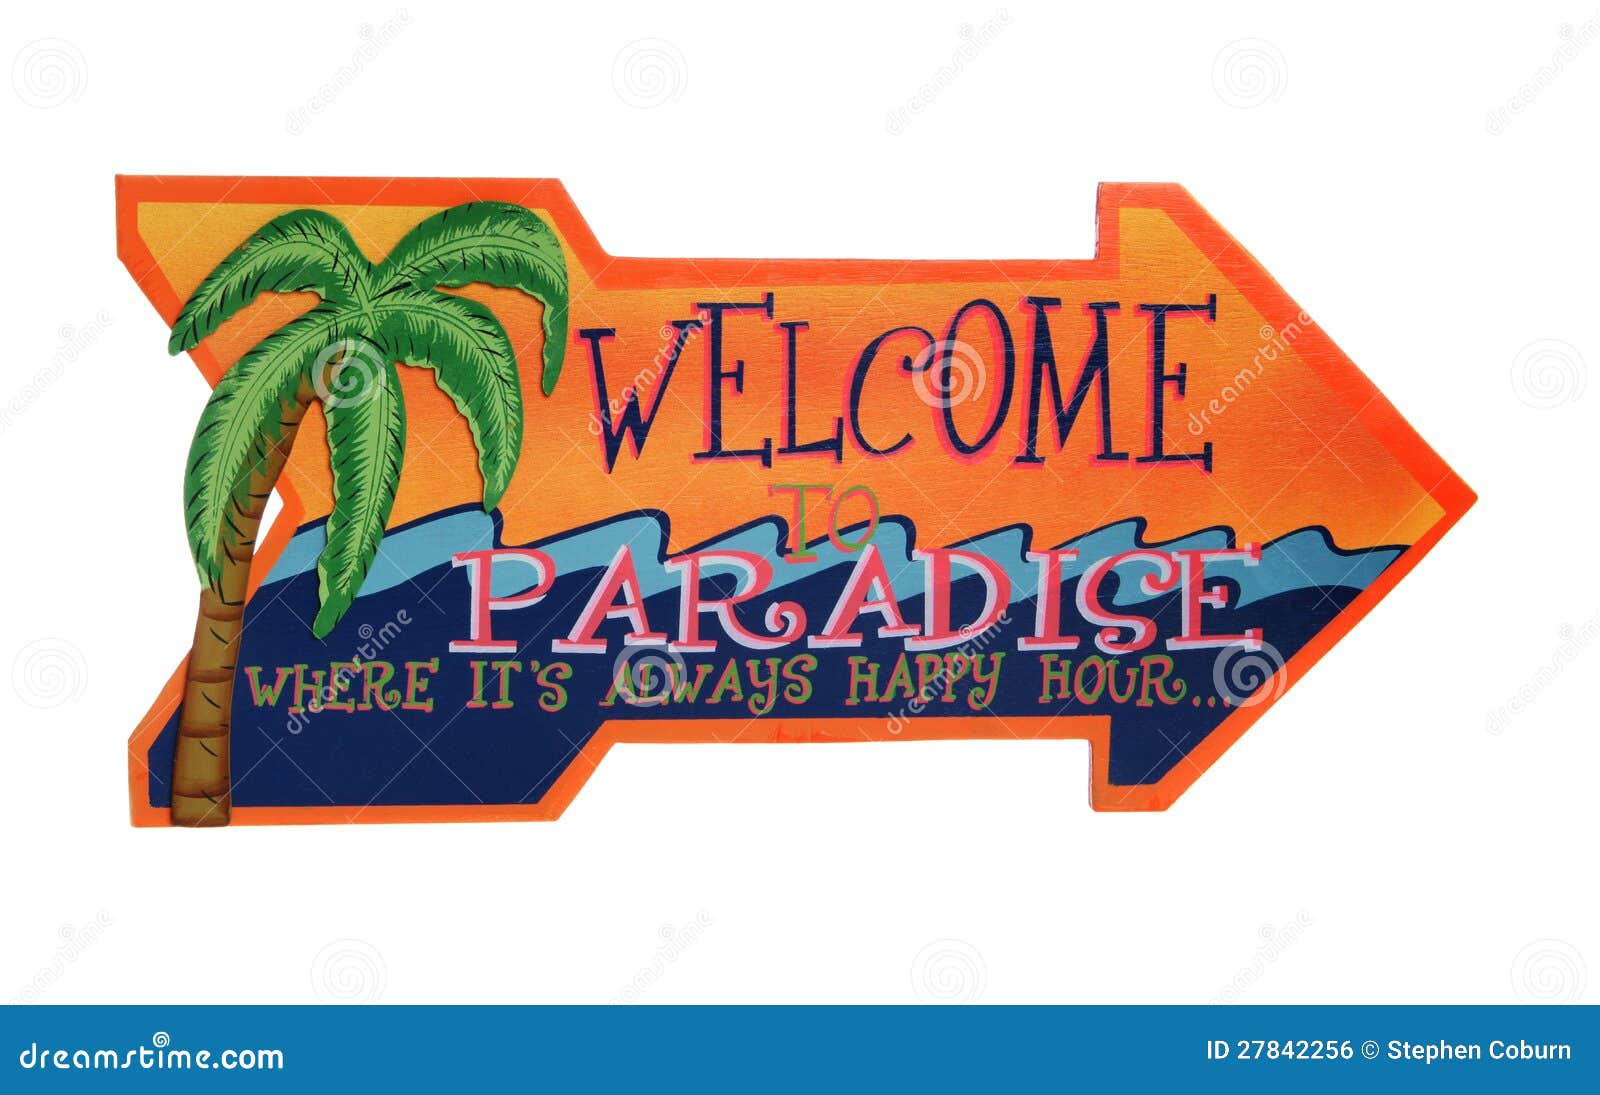 232 best images about Welcome Signs on Pinterest | Maui 